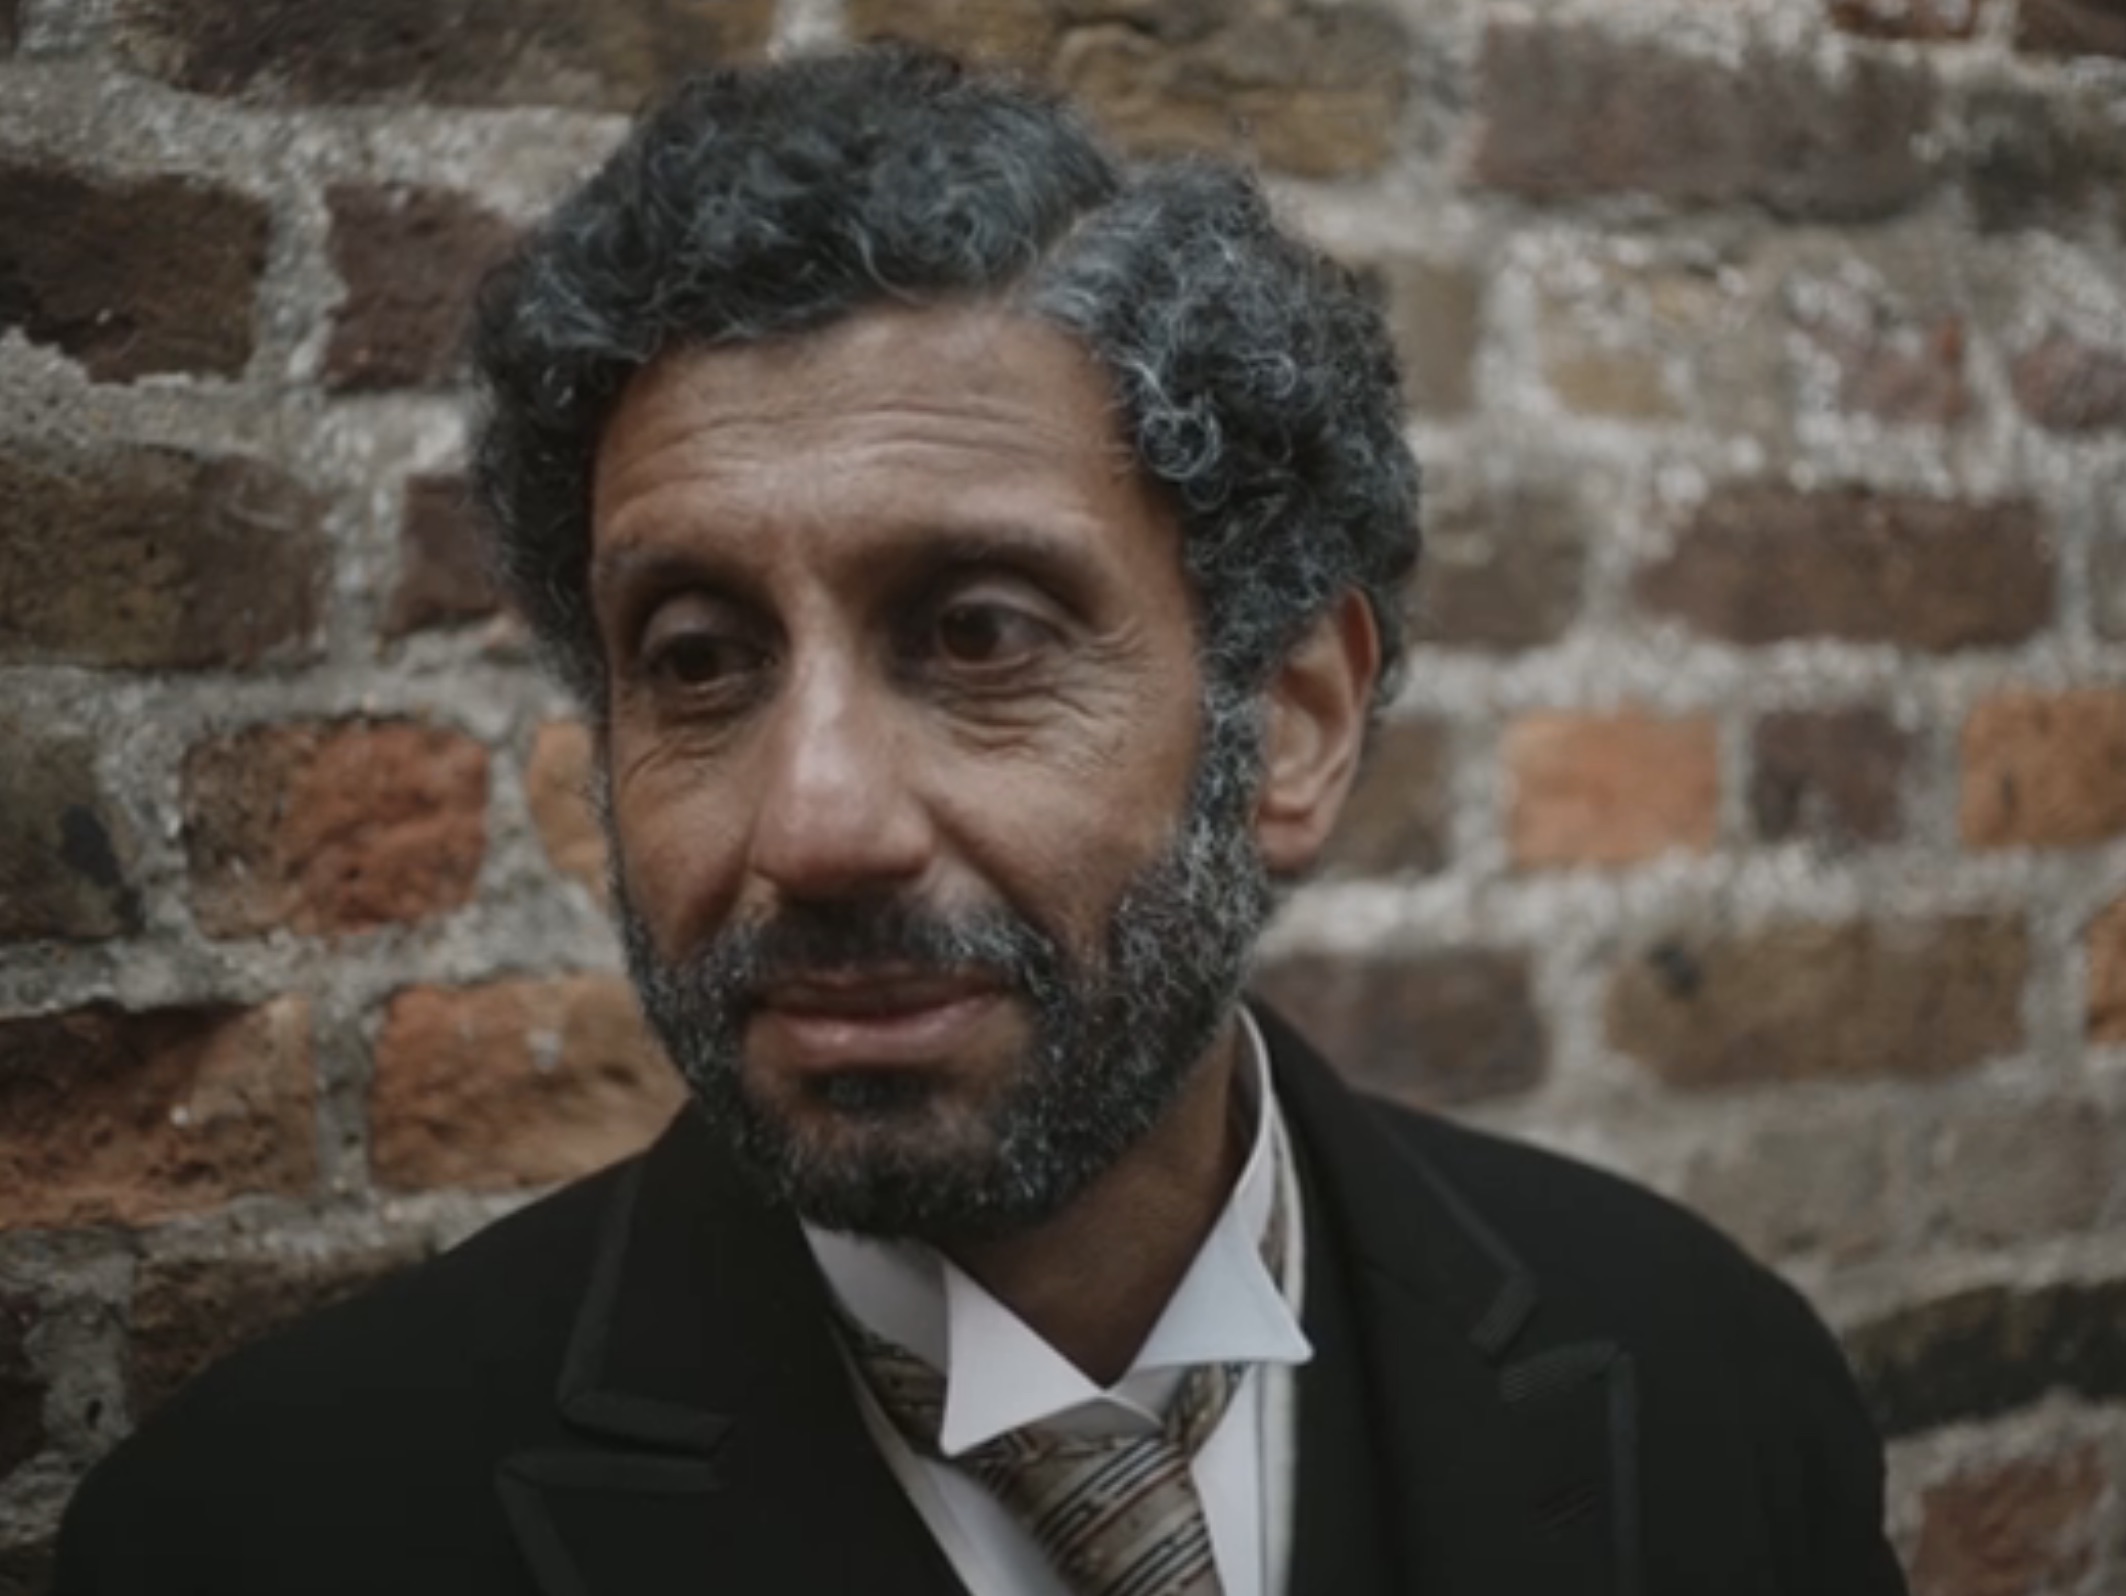 The Electrical Life of Louis Wain Cast - Adeel Akhtar as Dan Rider